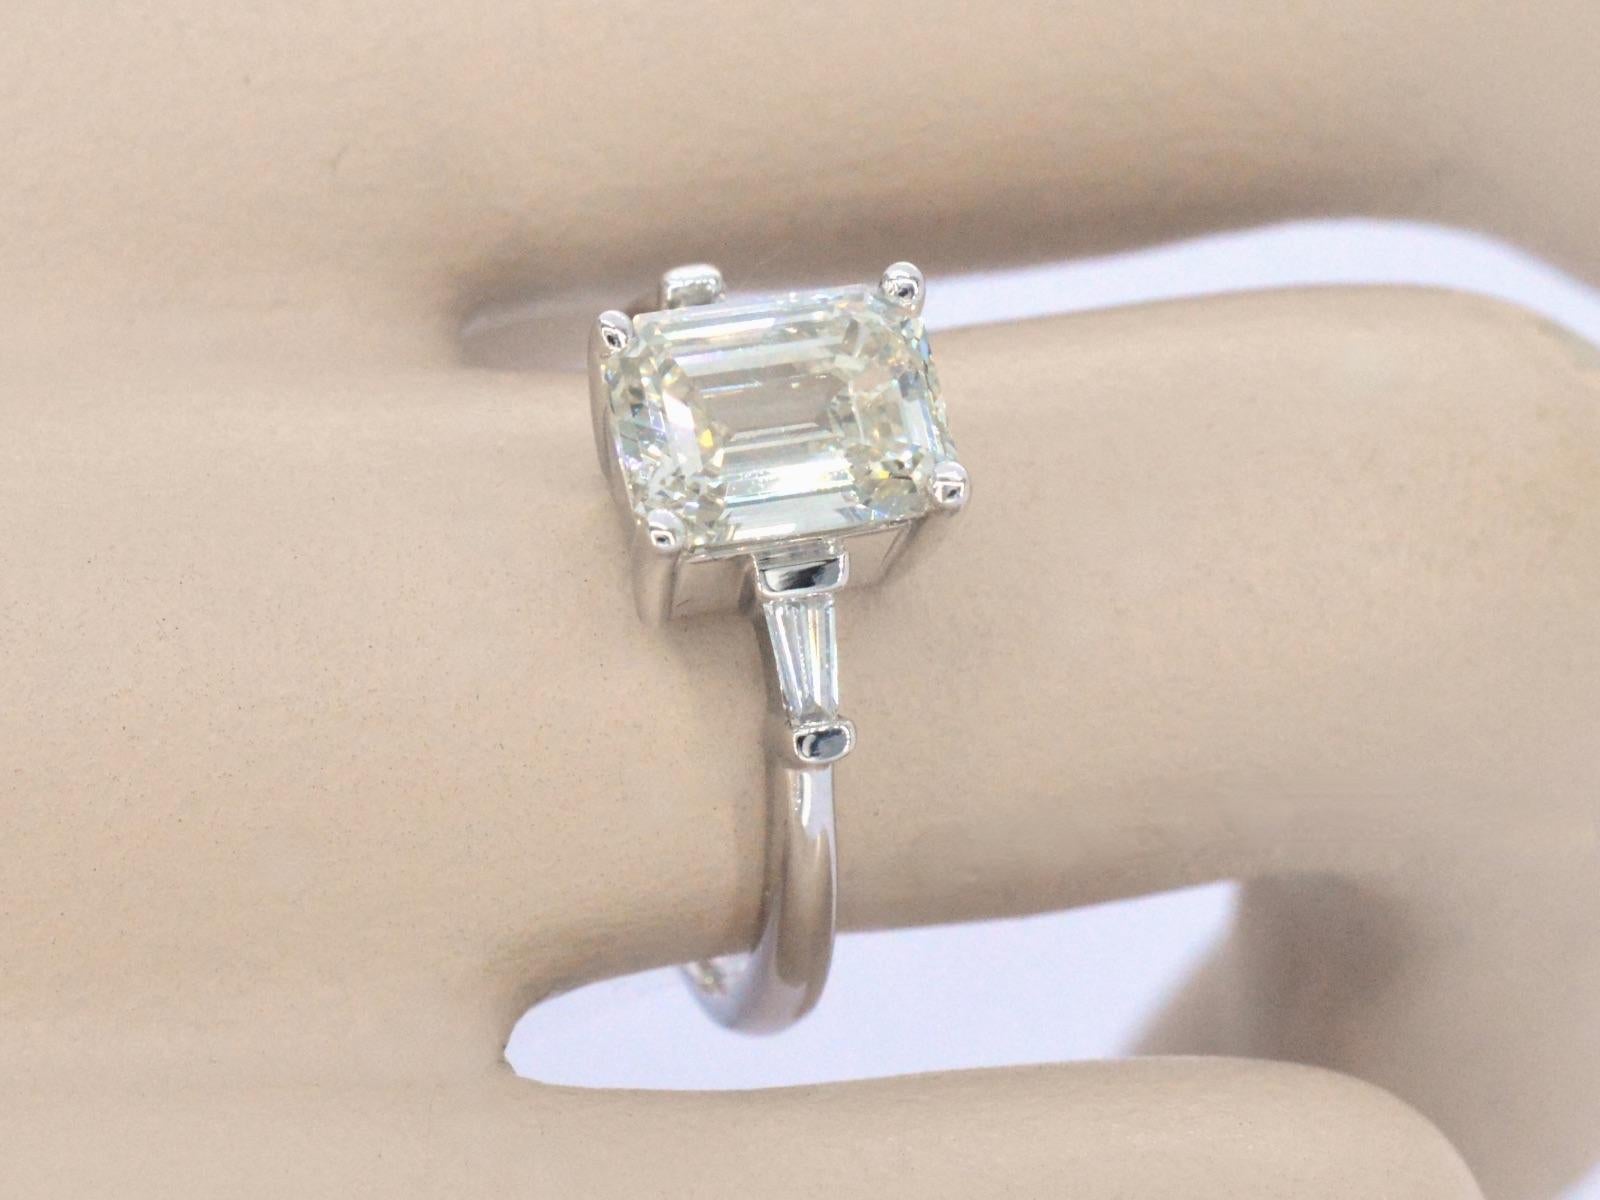 Diamonds: 1 piece; Weight: 2.00 carat; Cut: Emerald cut; Color: J; Purity: VS; Grinding quality: Very nice; Diamonds: 2 pieces; Weight: 0.20 carat; Cut: Tapered Baguette; Colour: F-G; Purity: VS; Grinding quality: Very nice; Jewel: Ring; Weight: 3.9